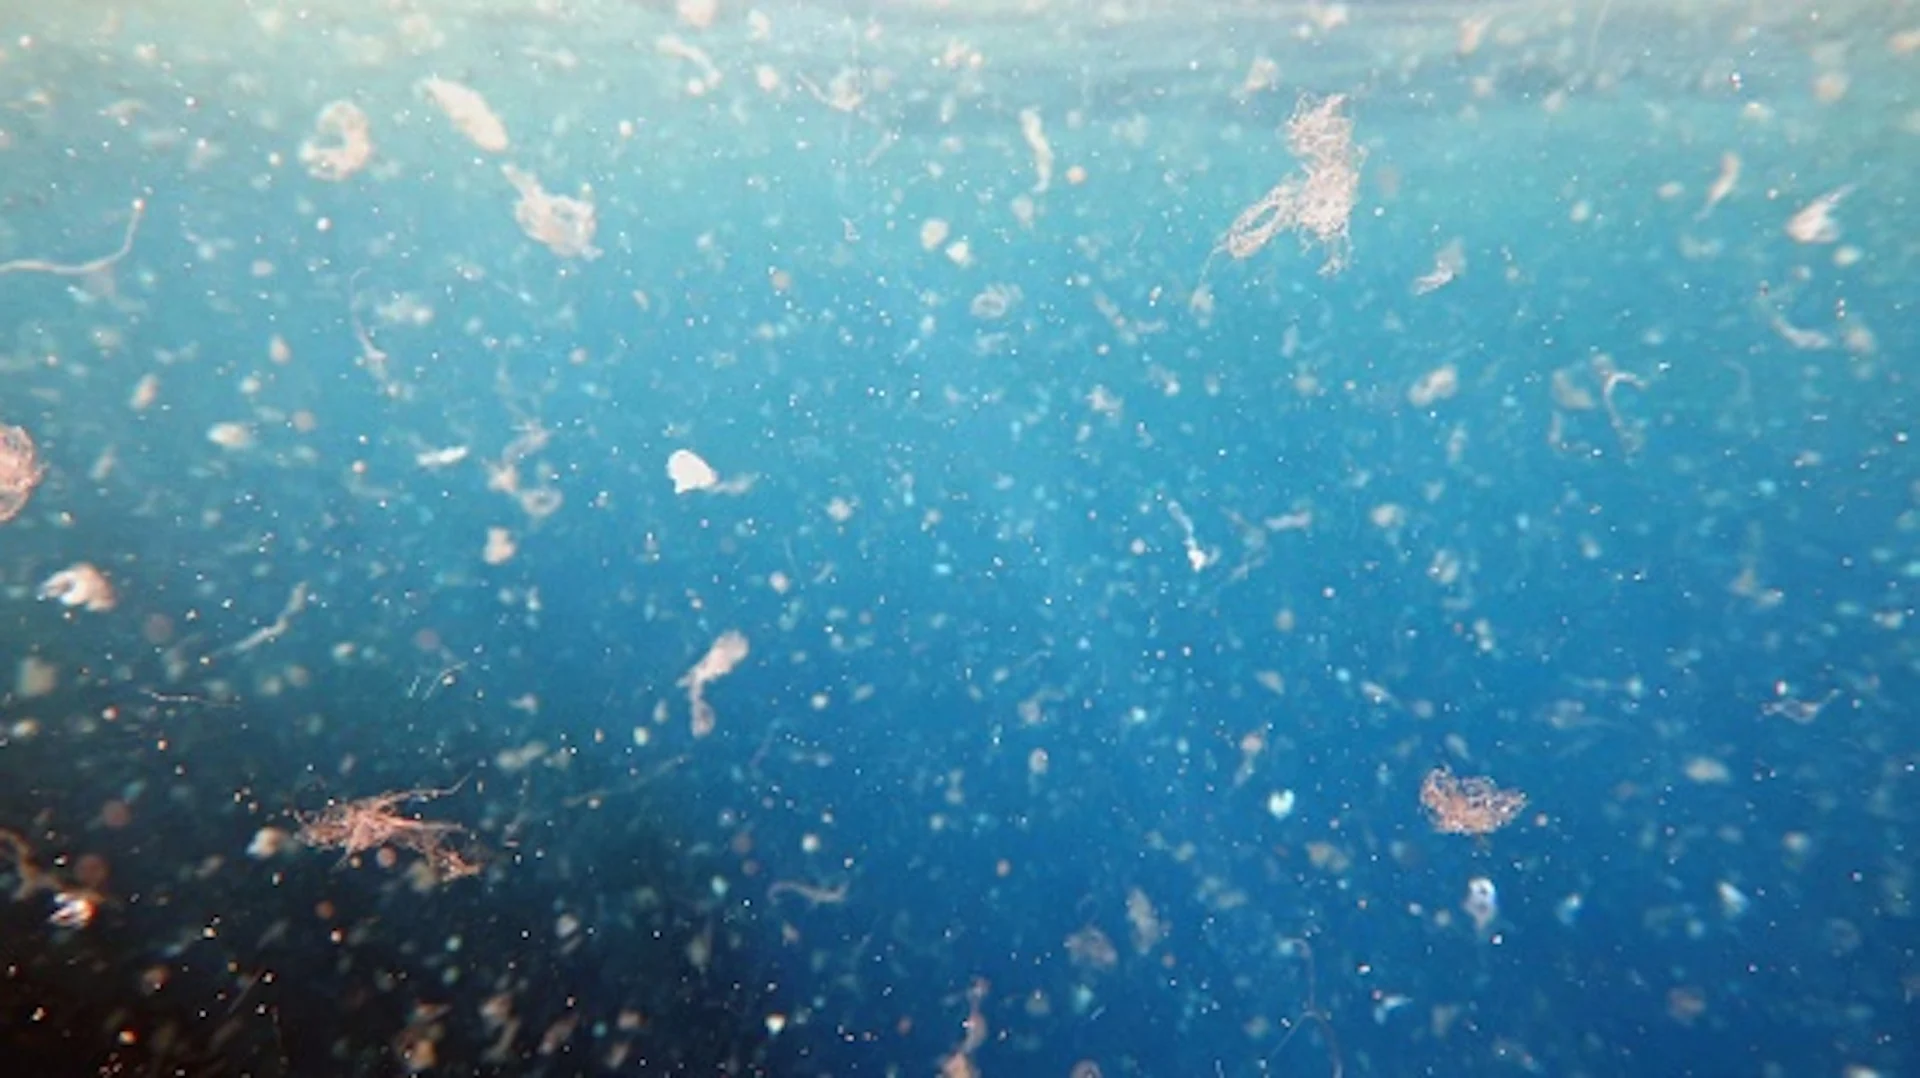 What are microplastics doing to human health? See how scientists are working to connect the dots